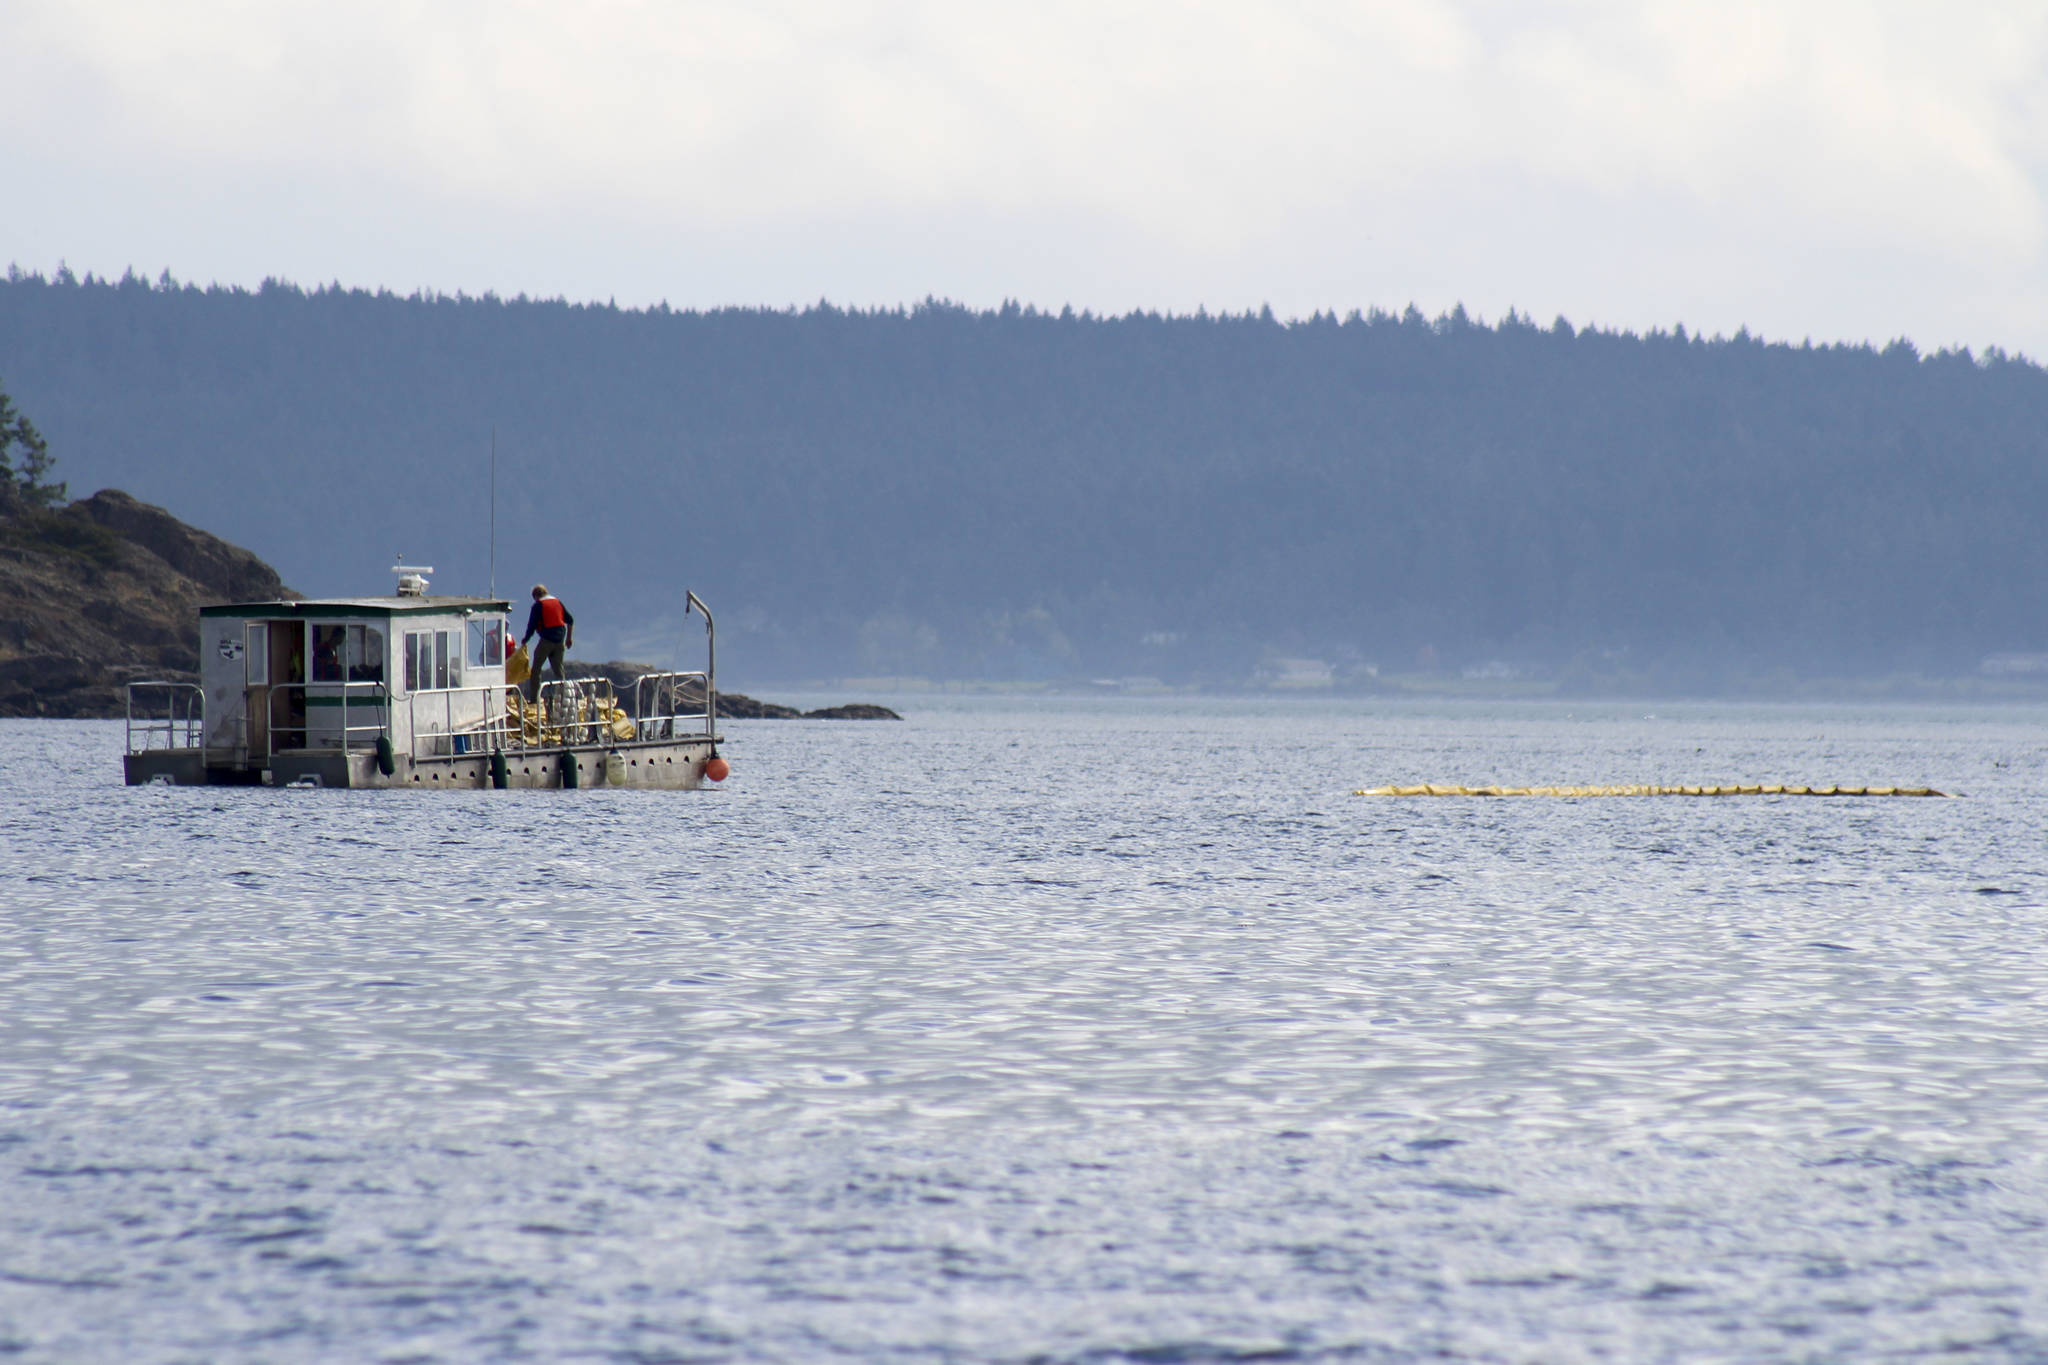 Volunteers from IOSA held a training exercise off Jackson Beach on Saturday, Sept. 21. Here they can be seen deploying a containment boom. <em>(Heather Spaulding/staff photo)</em>